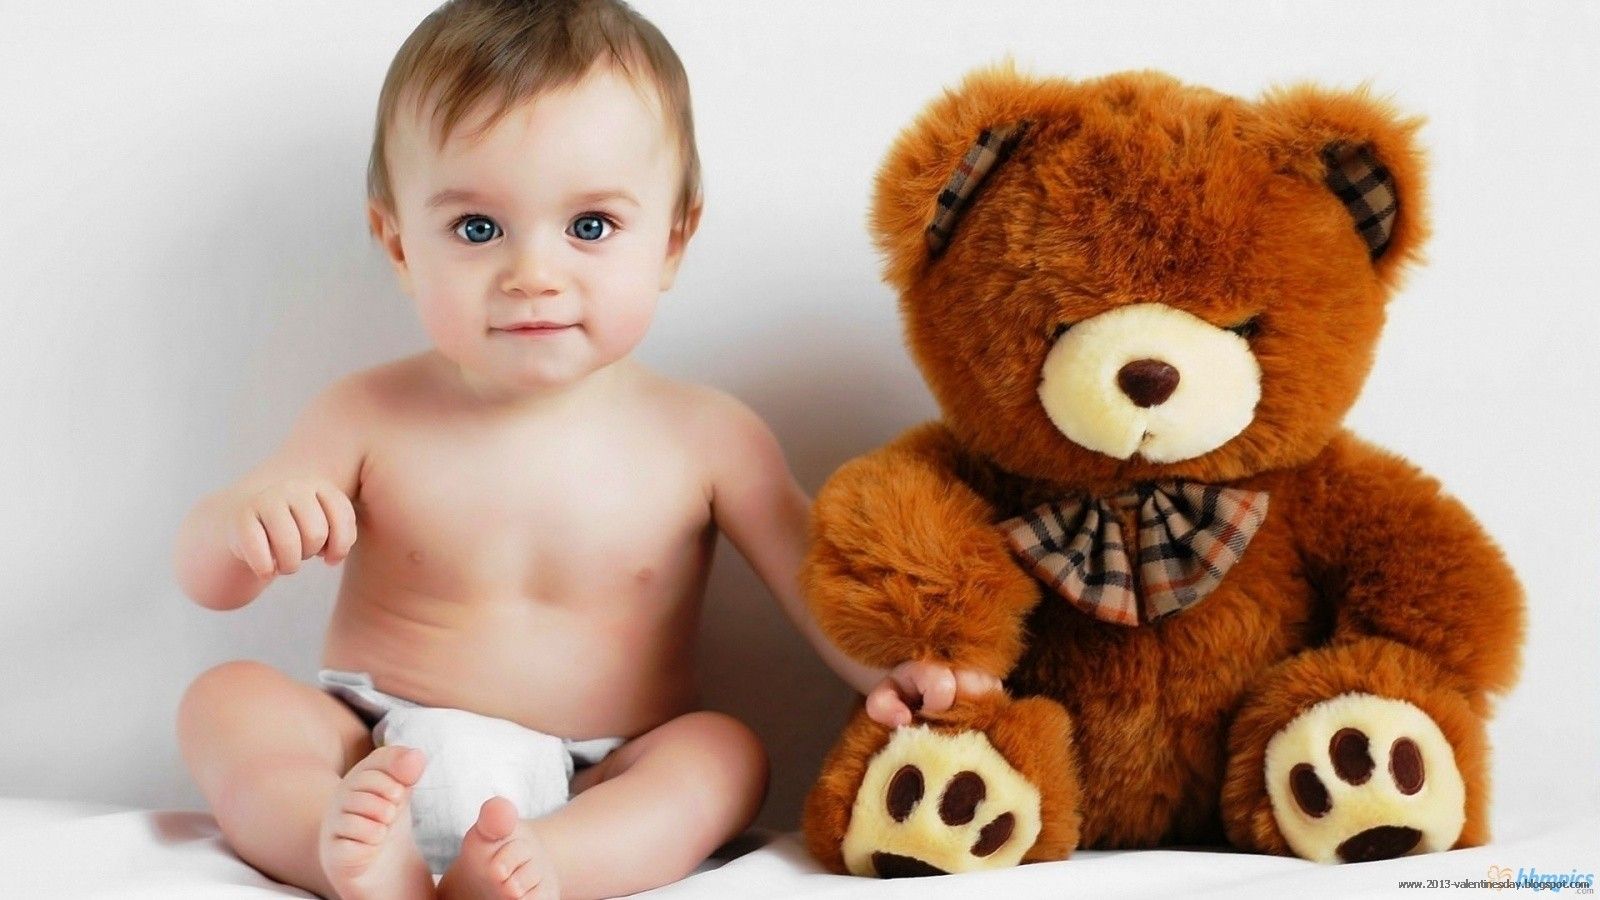 Valentines day Teddy bear gift ideas n HD wallpapers | Valentine's Day